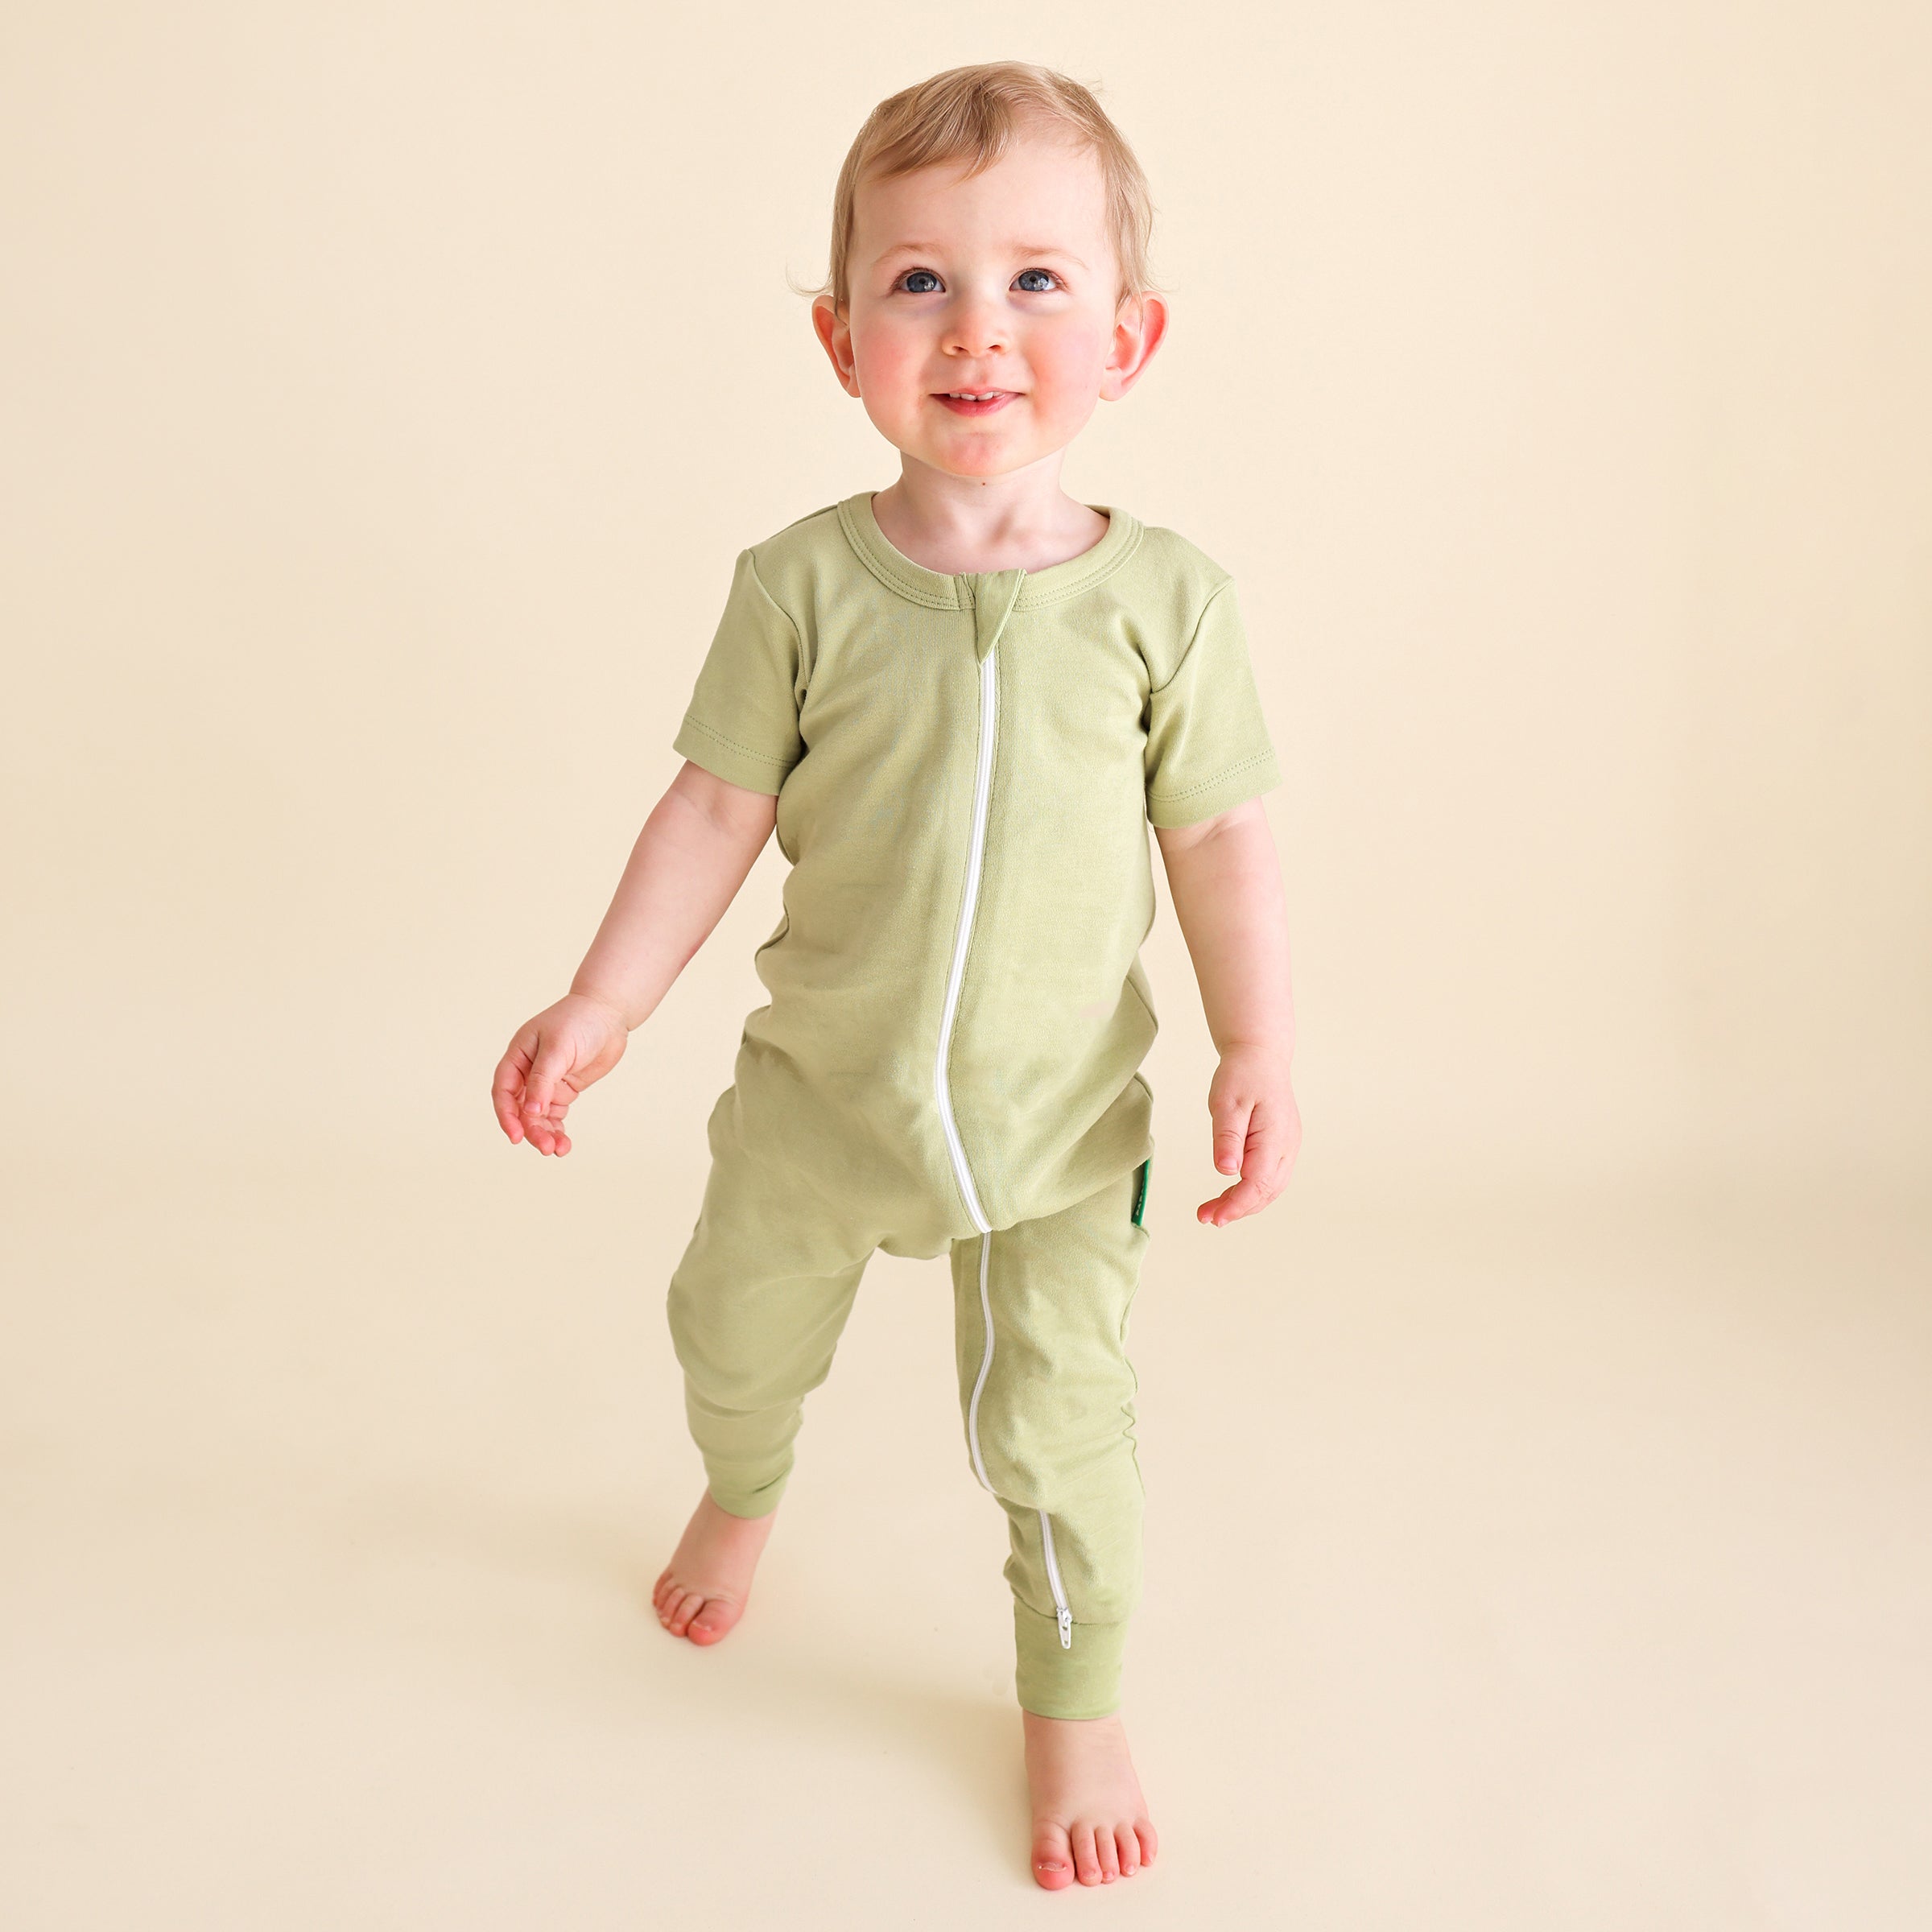 Essential Basics '2-Way' Zip Romper - Short Sleeve - Organic Baby Clothes, Kids Clothes, & Gifts | Parade Organics